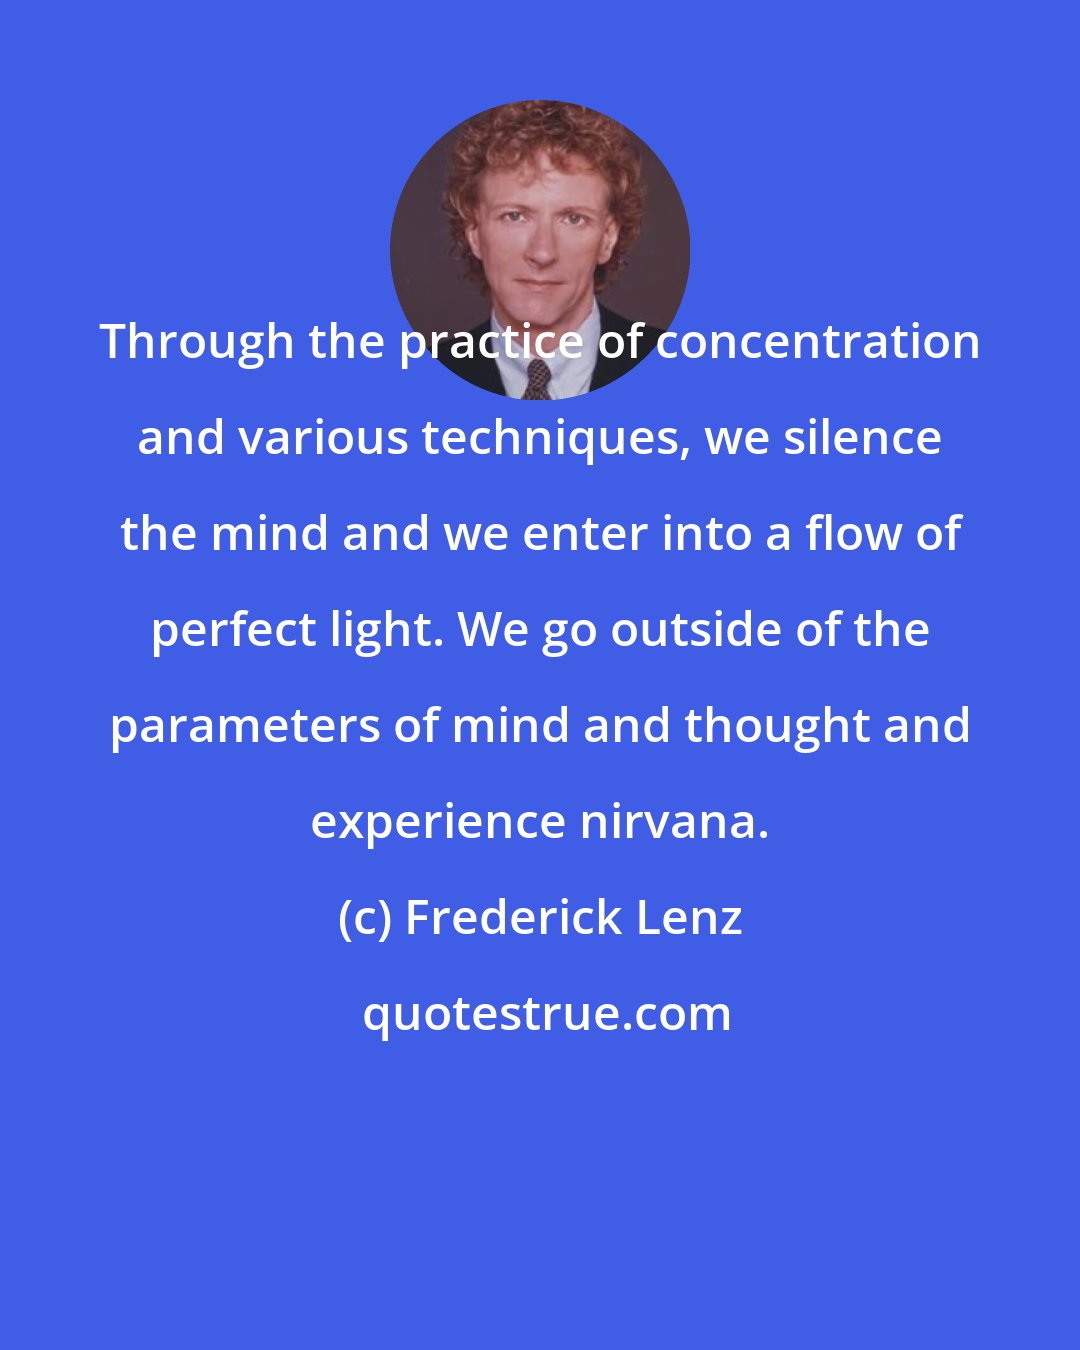 Frederick Lenz: Through the practice of concentration and various techniques, we silence the mind and we enter into a flow of perfect light. We go outside of the parameters of mind and thought and experience nirvana.